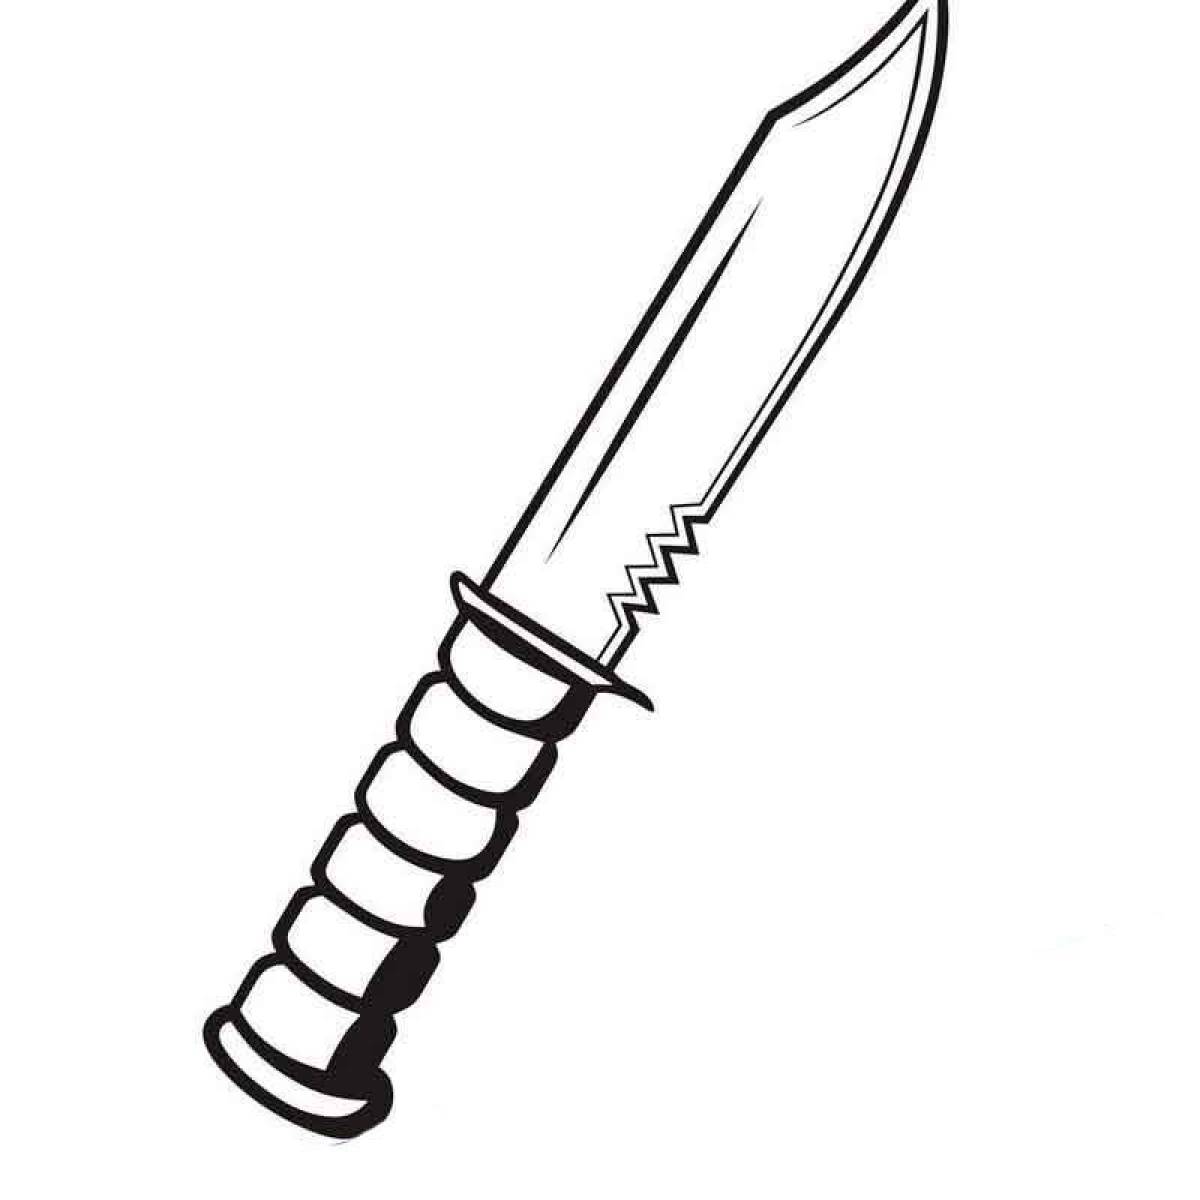 Awesome standoff 2 knives coloring page